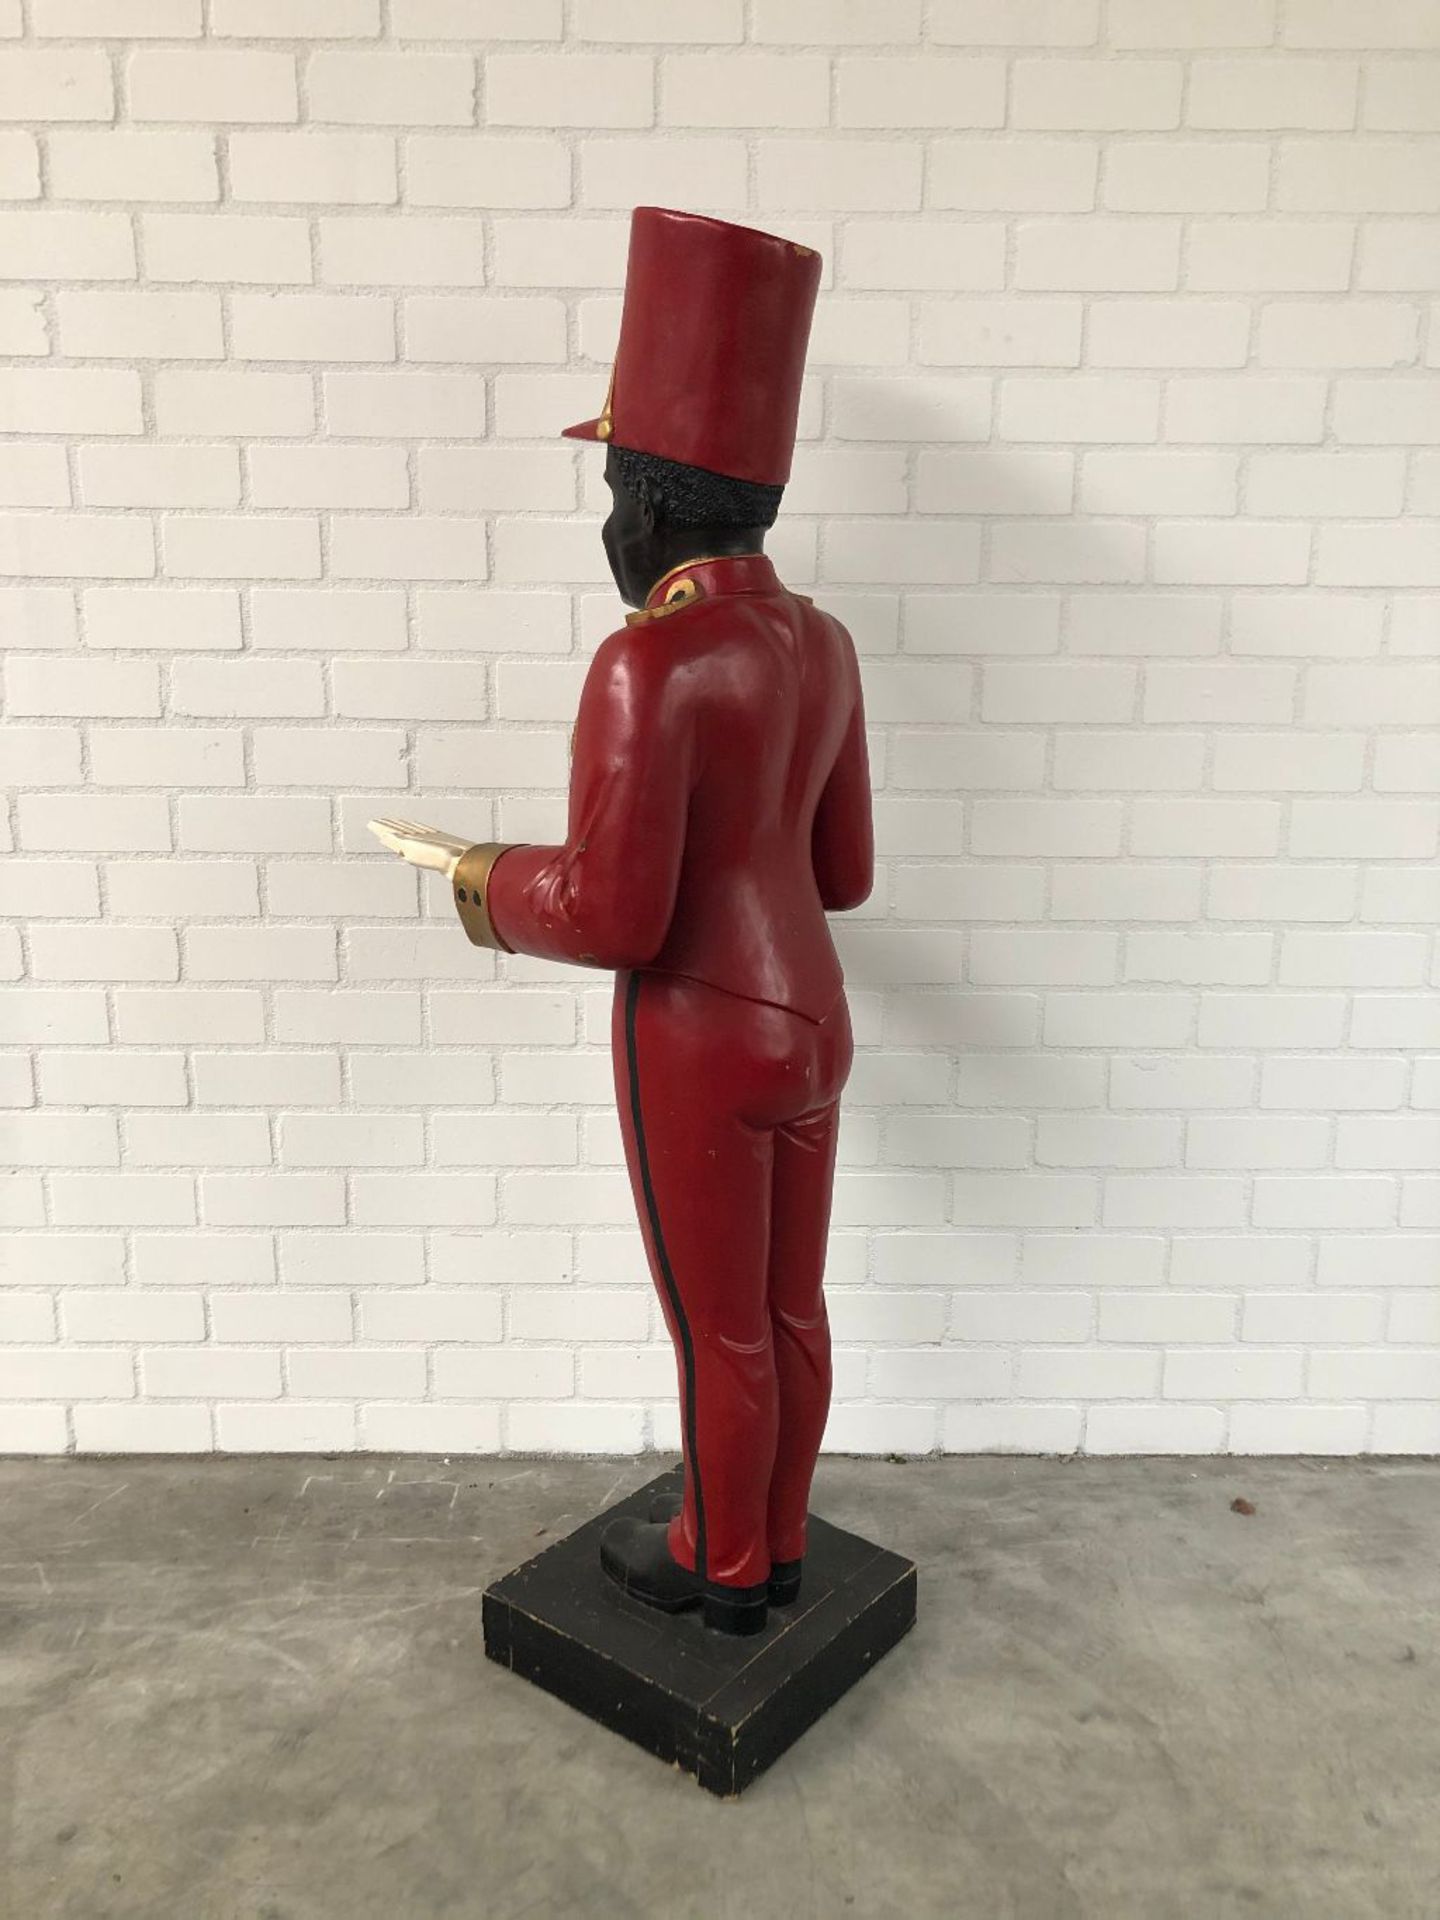 Antique Lifesize Wooden Butler Statue - Image 8 of 8